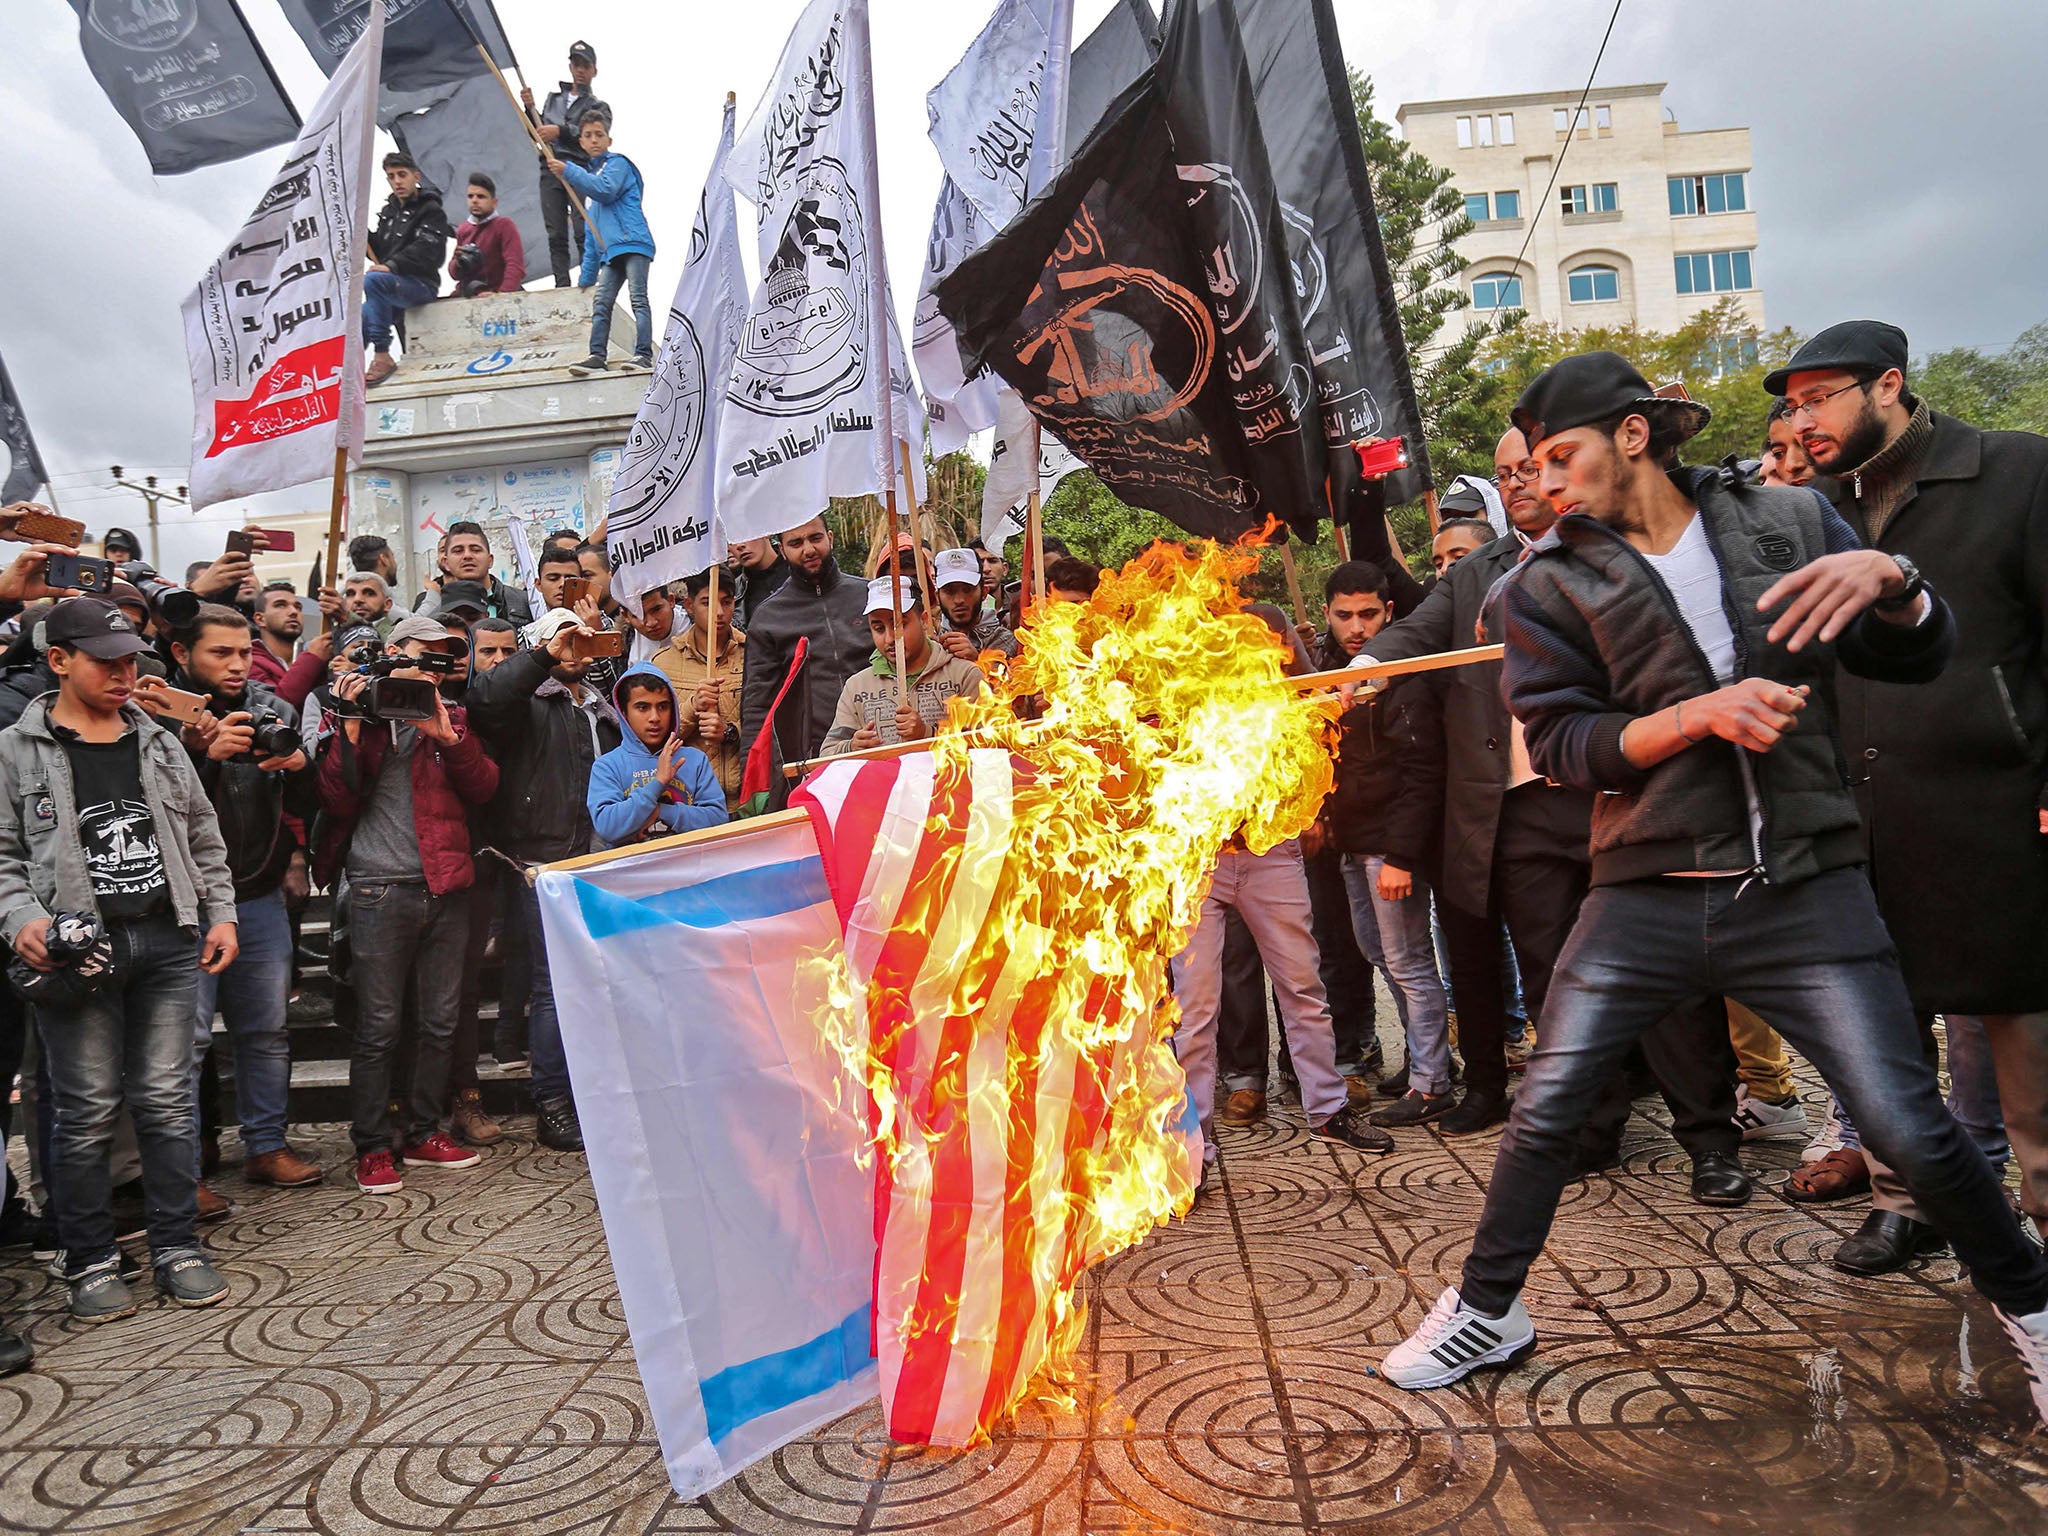 Palestinian protesters burn the US and Israeli flags in Gaza City in response to Trump's announcement